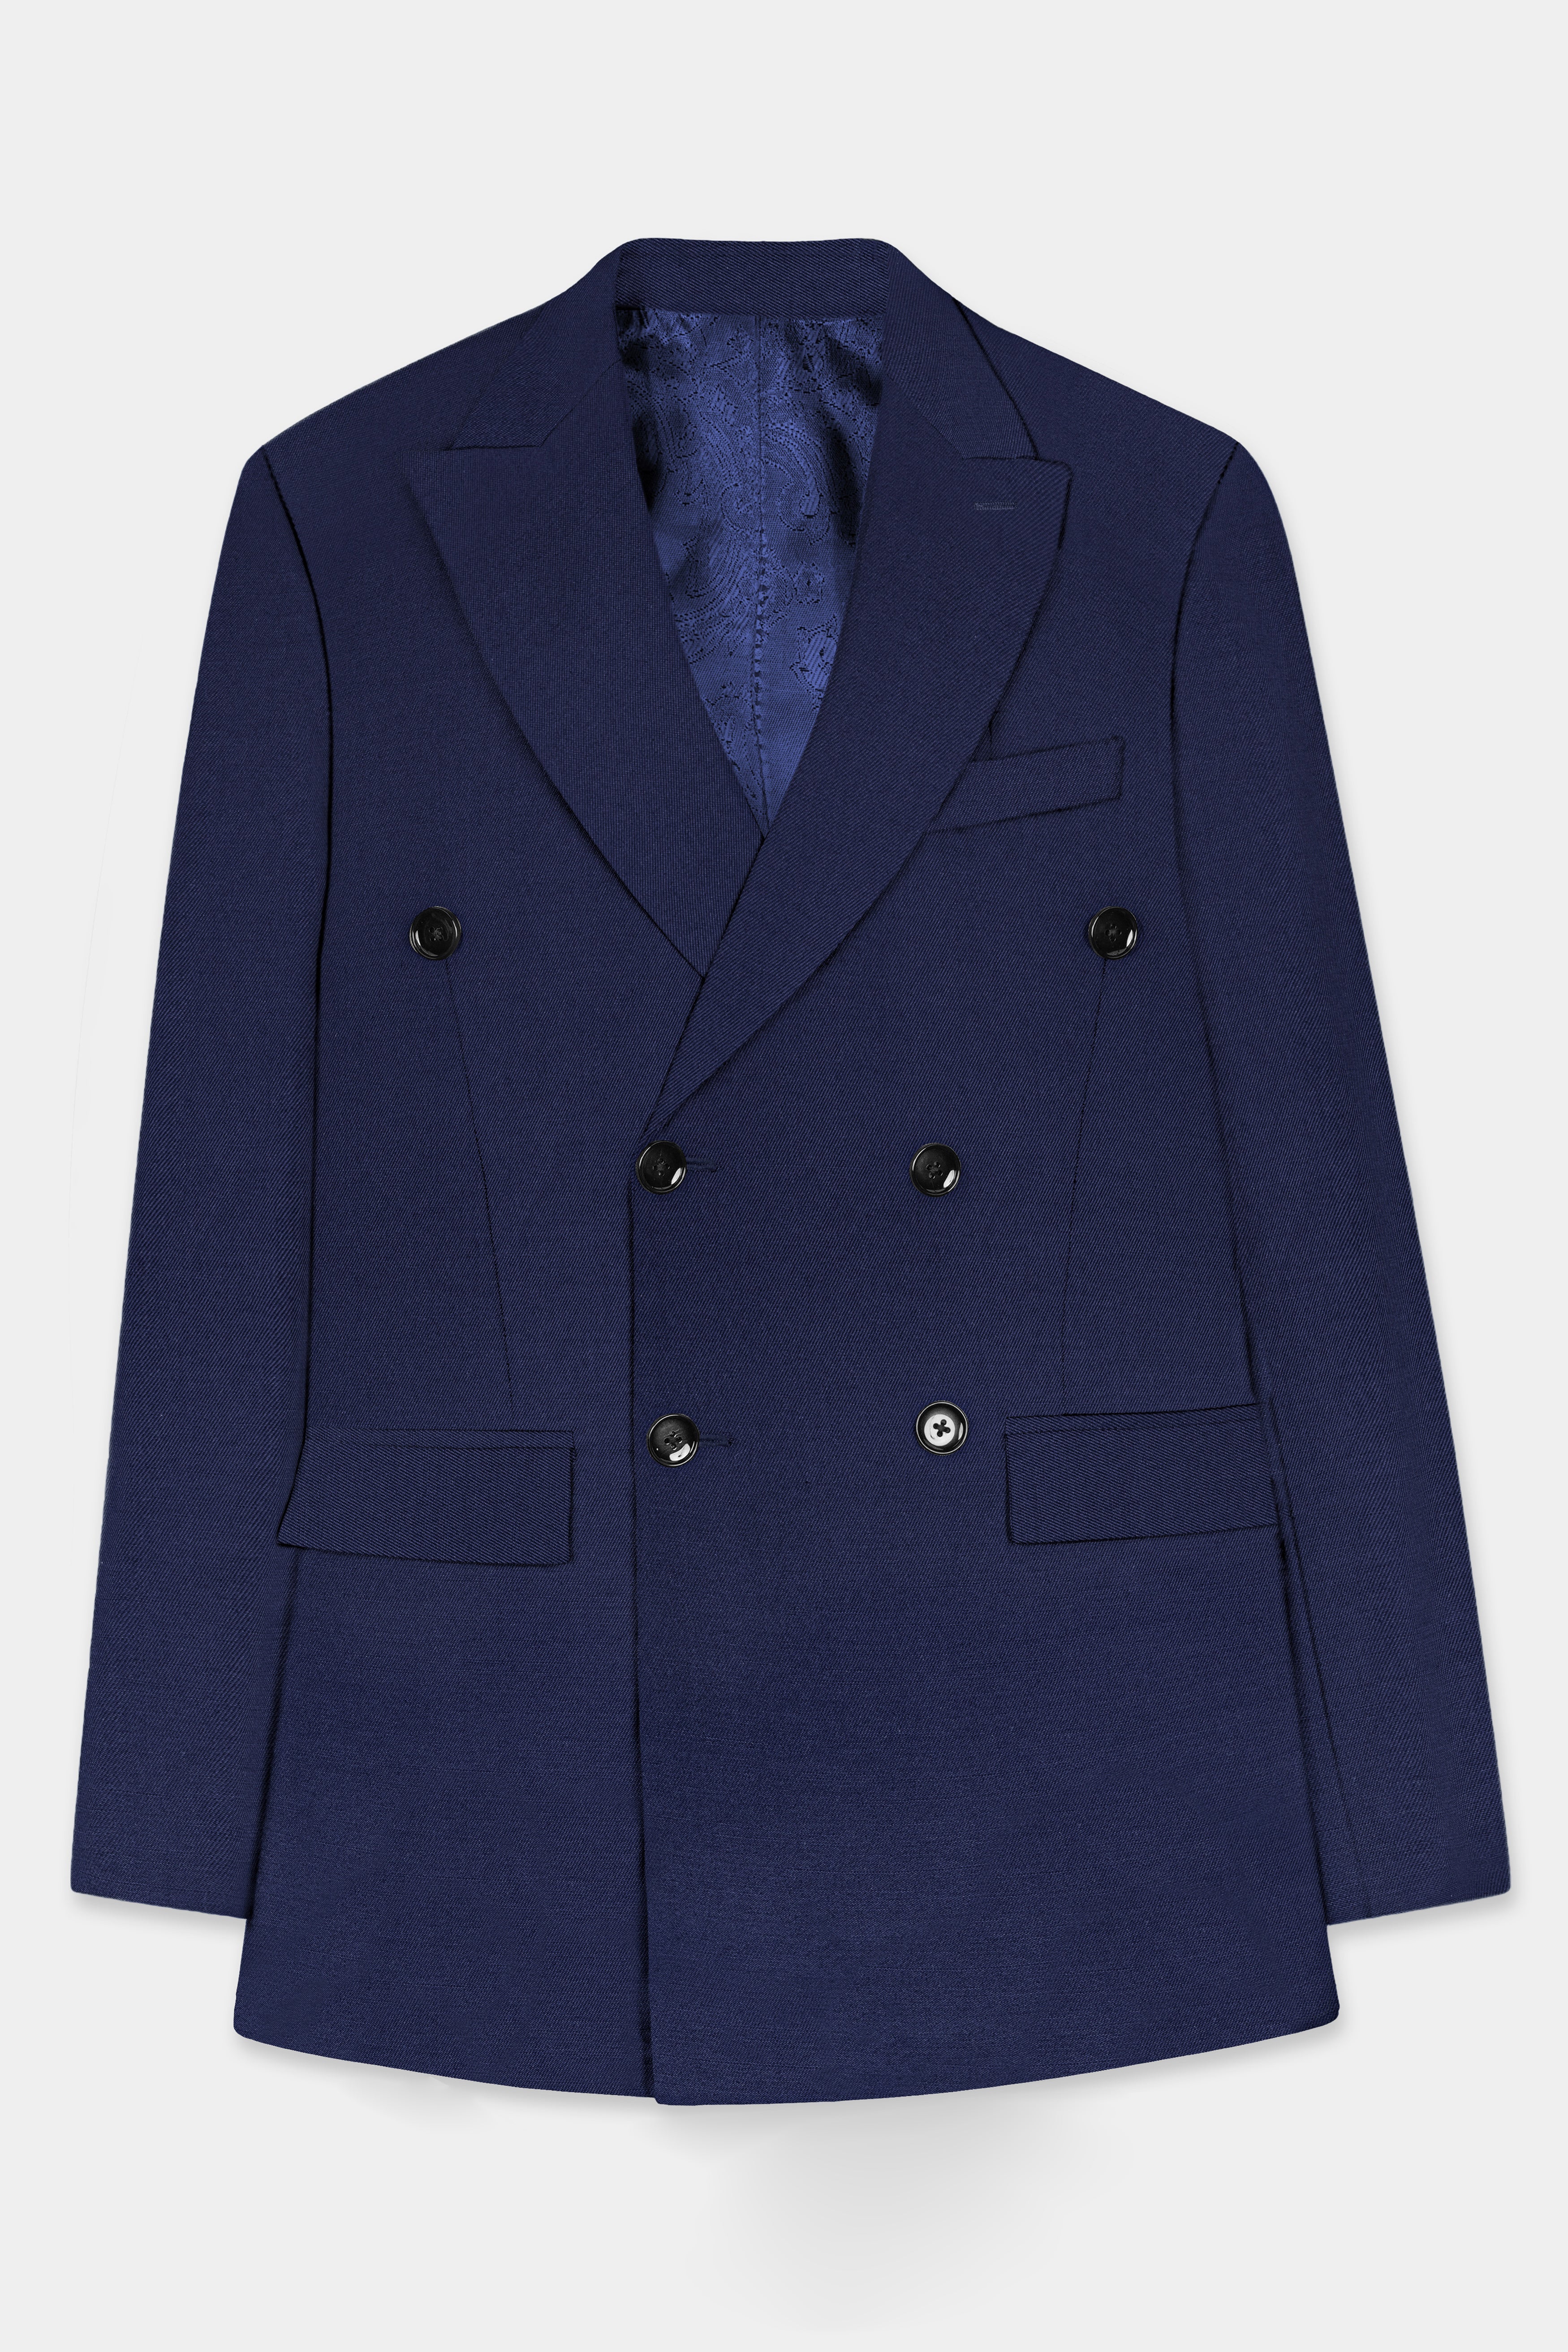 Tealish Blue Plain Solid Wool Blend Double Breasted Blazer